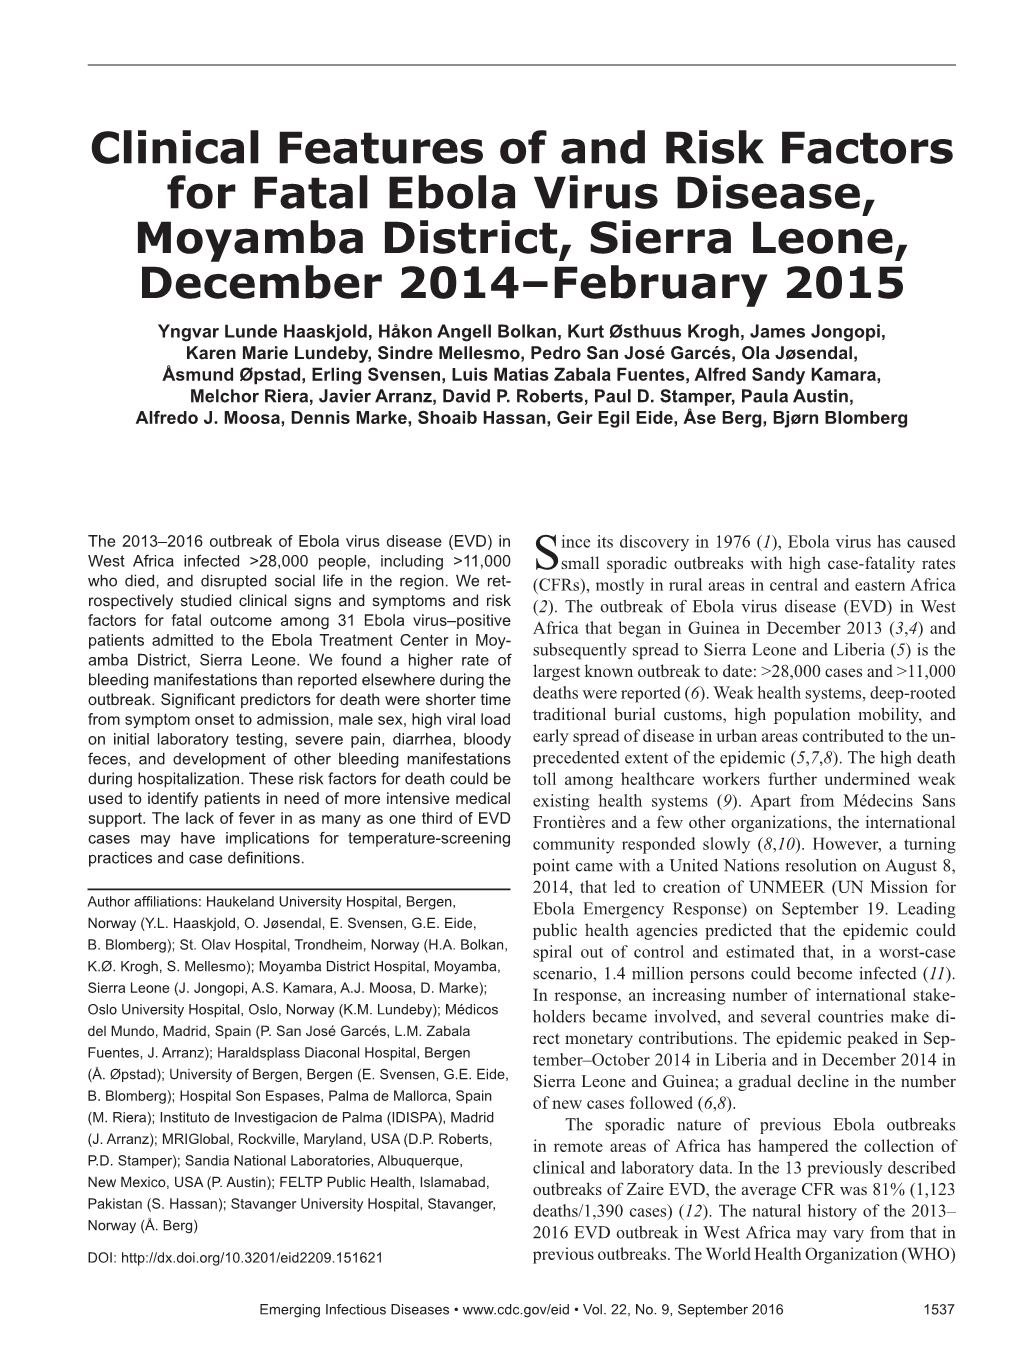 Clinical Features of and Risk Factors for Fatal Ebola Virus Disease